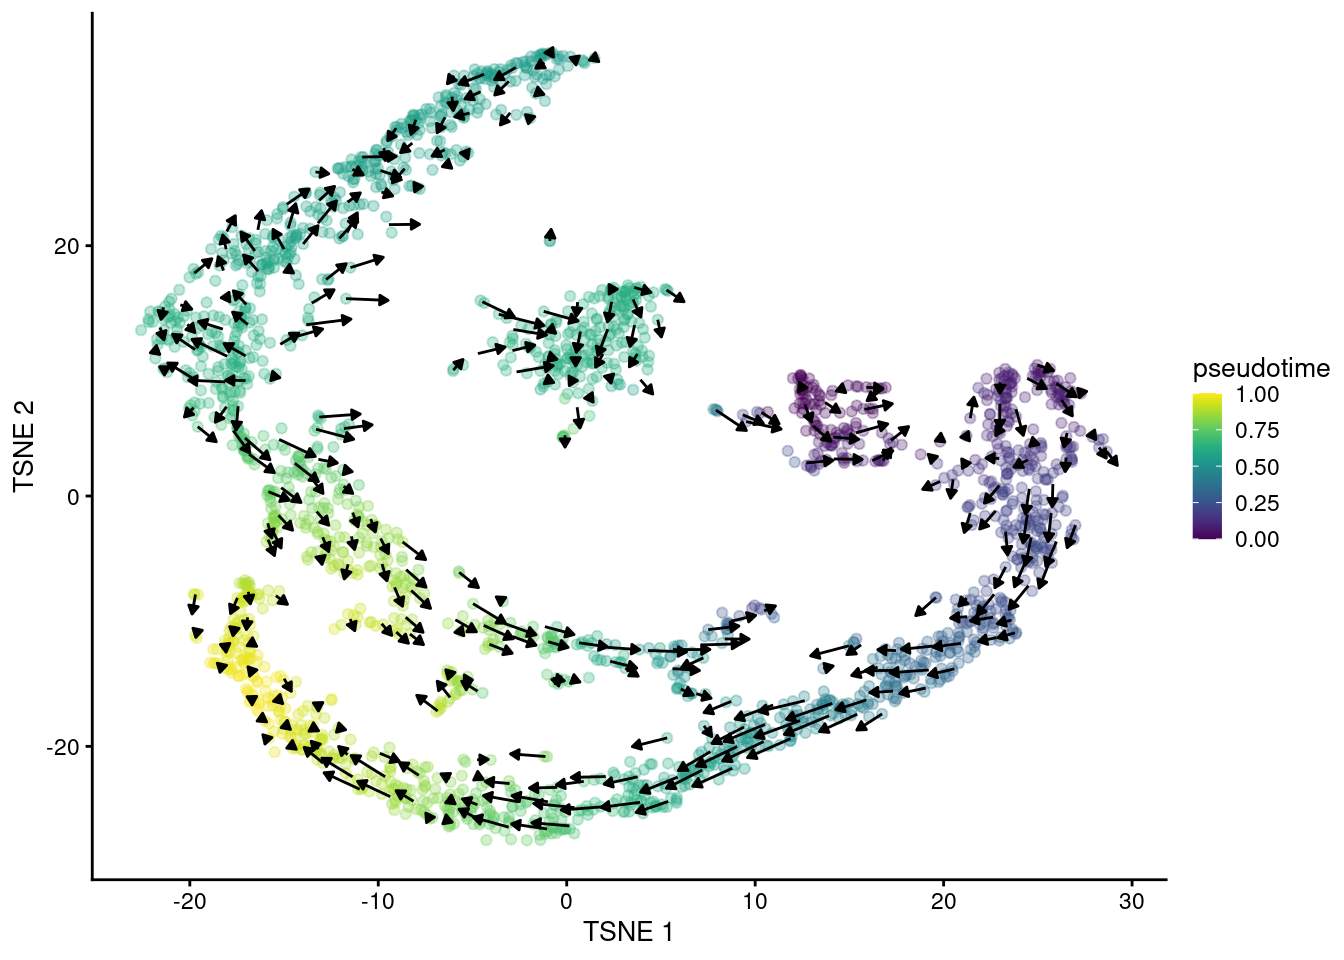 $t$-SNE plot of the Hermann spermatogenesis dataset, where each point is a cell and is colored by its velocity pseudotime. Arrows indicate the direction and magnitude of the velocity vectors, averaged over nearby cells.